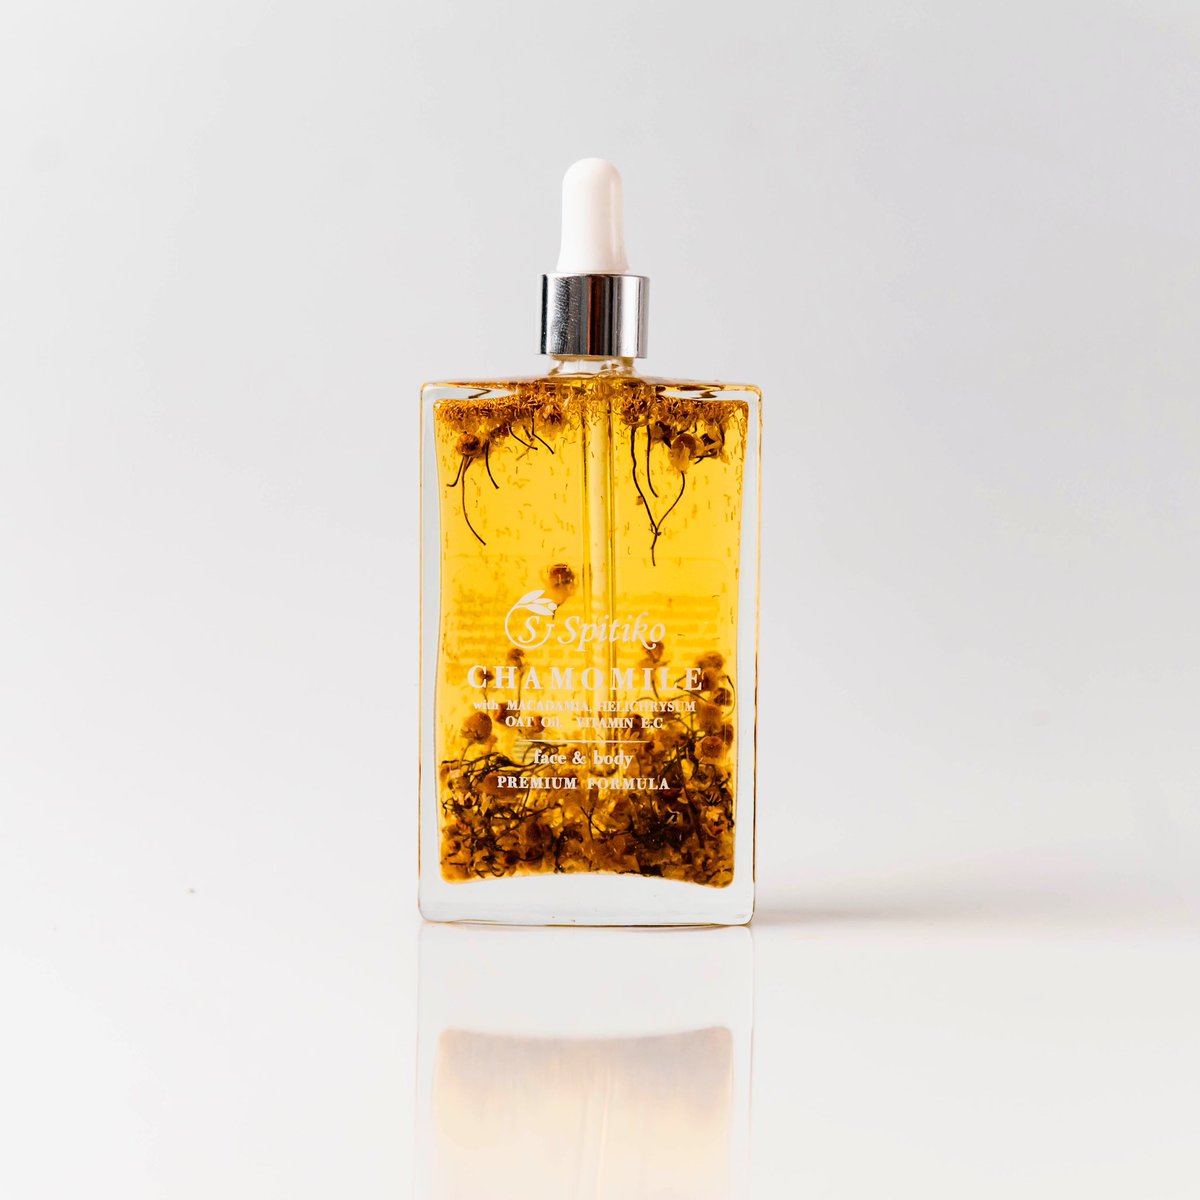 Spitiko FACE-BODY OIL WITH CALENDULA⚡️

Shop Now in Our Website Here
 ⬇️⬇️⬇️
zeusgreekcollection.com

#zeusgreekcollection #zeusgreek #zeus #zgk #mykonos #greek
#athens #jewerlystore #vintagejewelly #sales #fallsales
#etsystore #etsystock